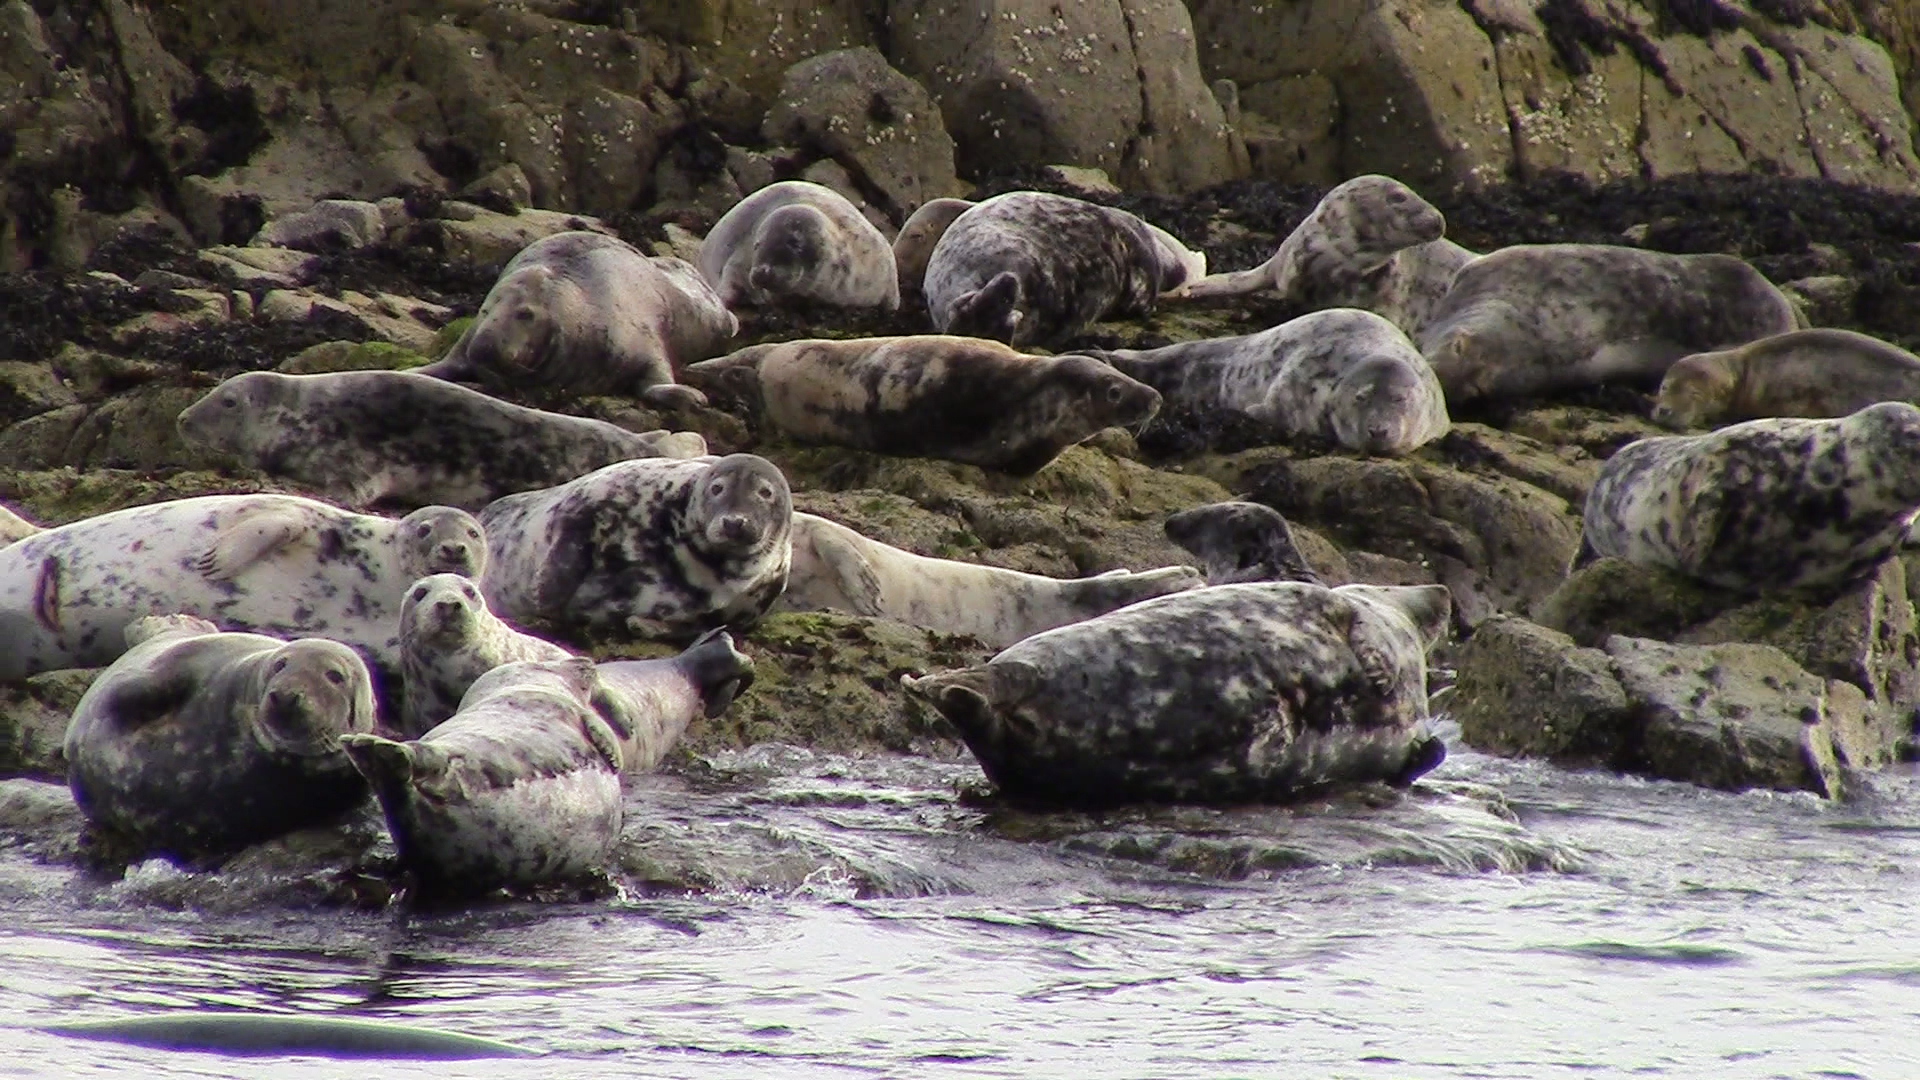 Grey seals basking in the sun on a rocky island. Their distinctive song brought back memories of solstice